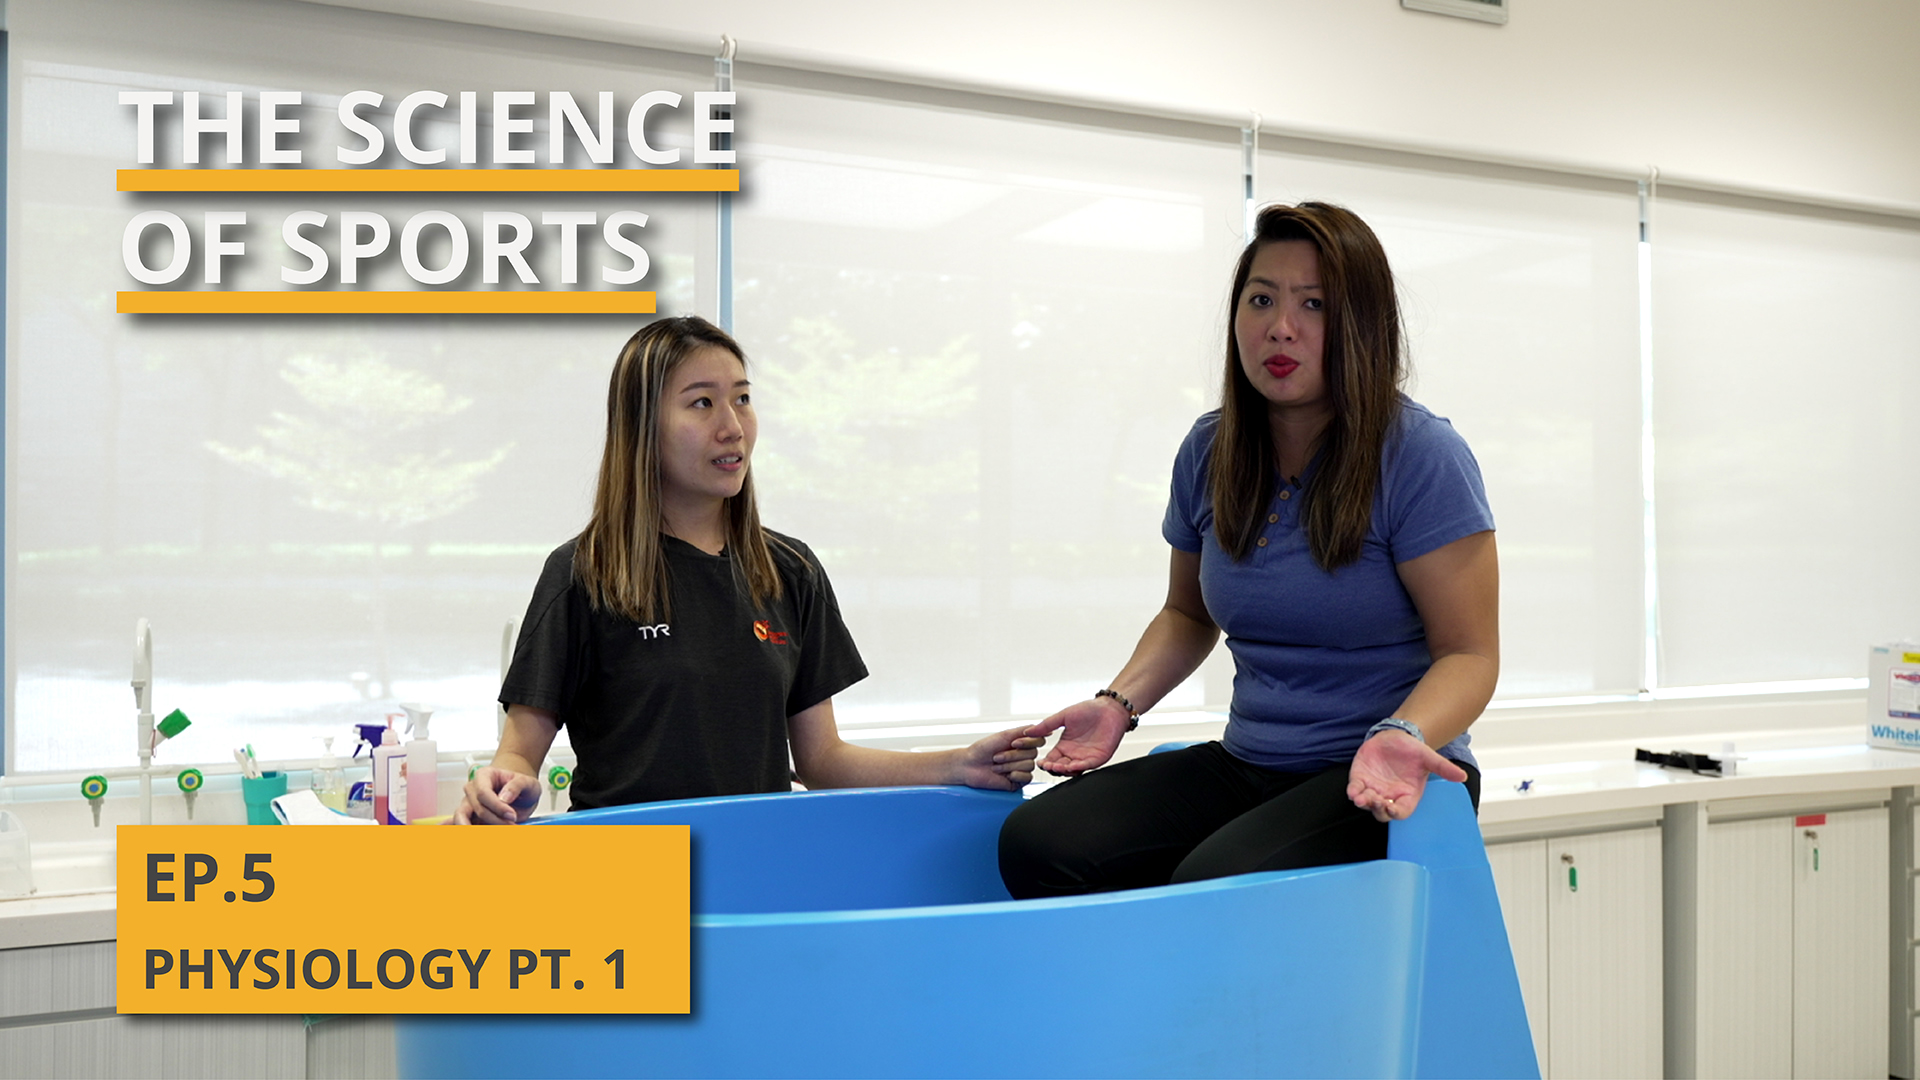 The Science of Sports Ep 5 - Physiology pt 1